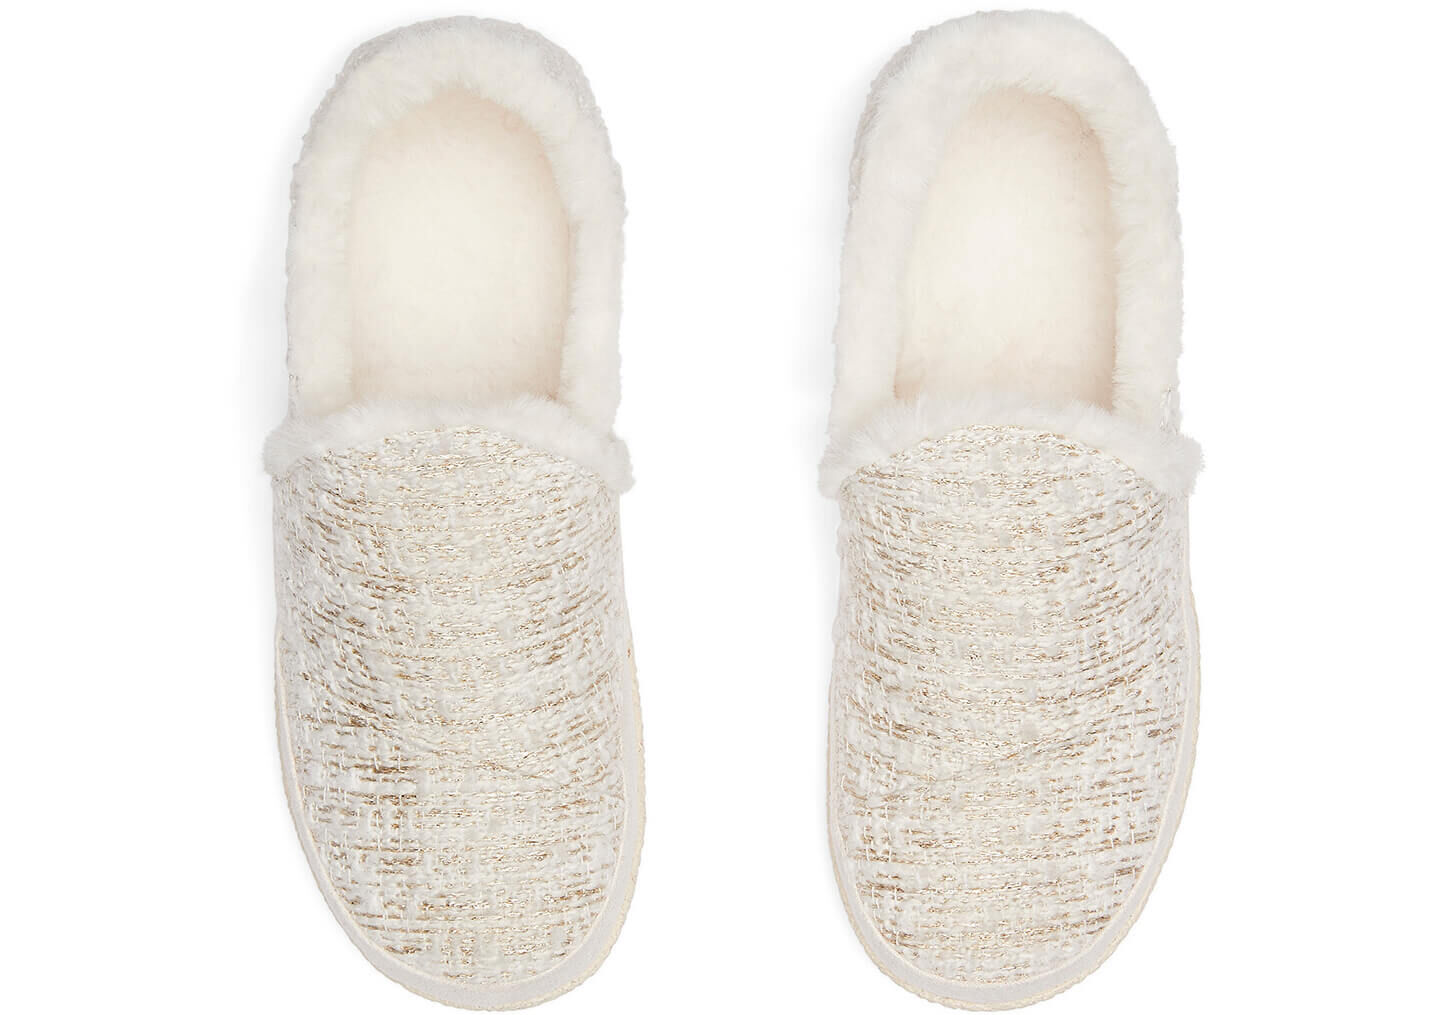 toms with fur inside